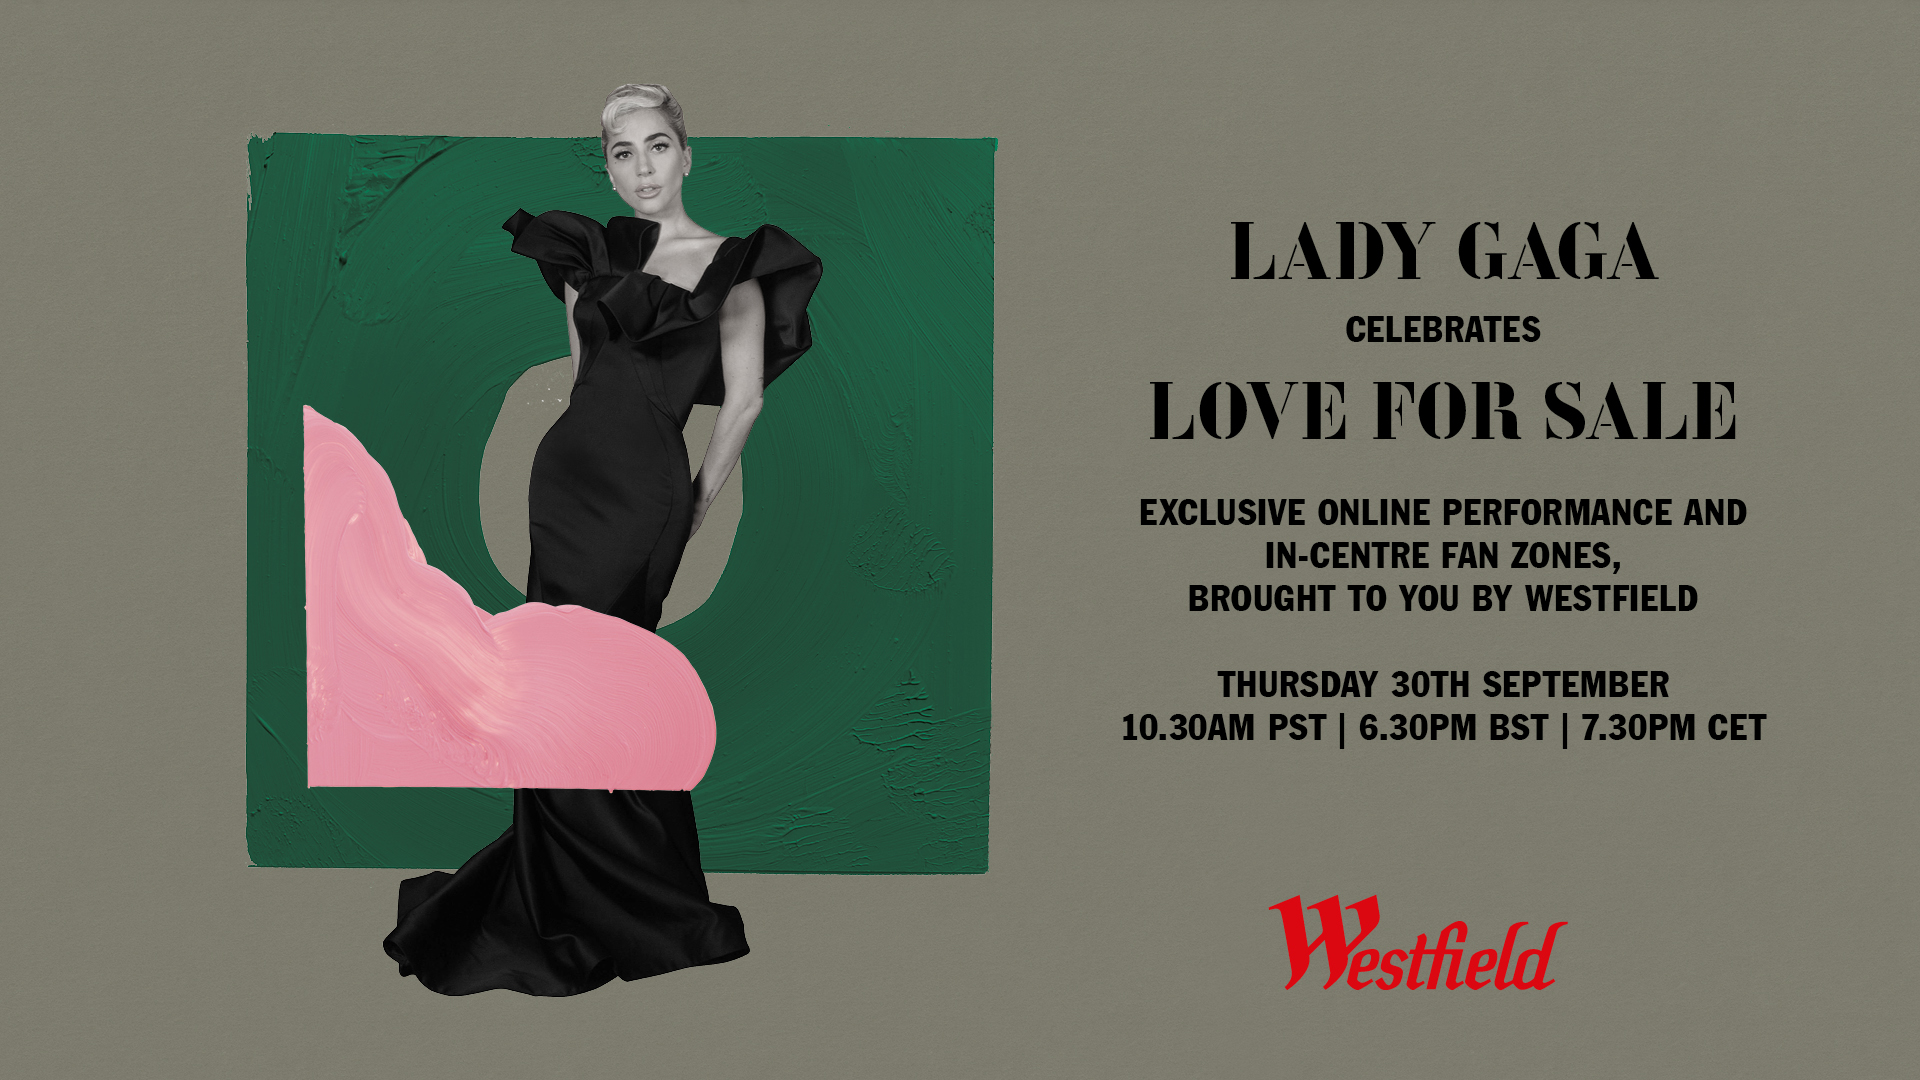 Lady Gaga celebrates Love for sale album with intimate jazz online  performance exclusively brought to fans by Westfield